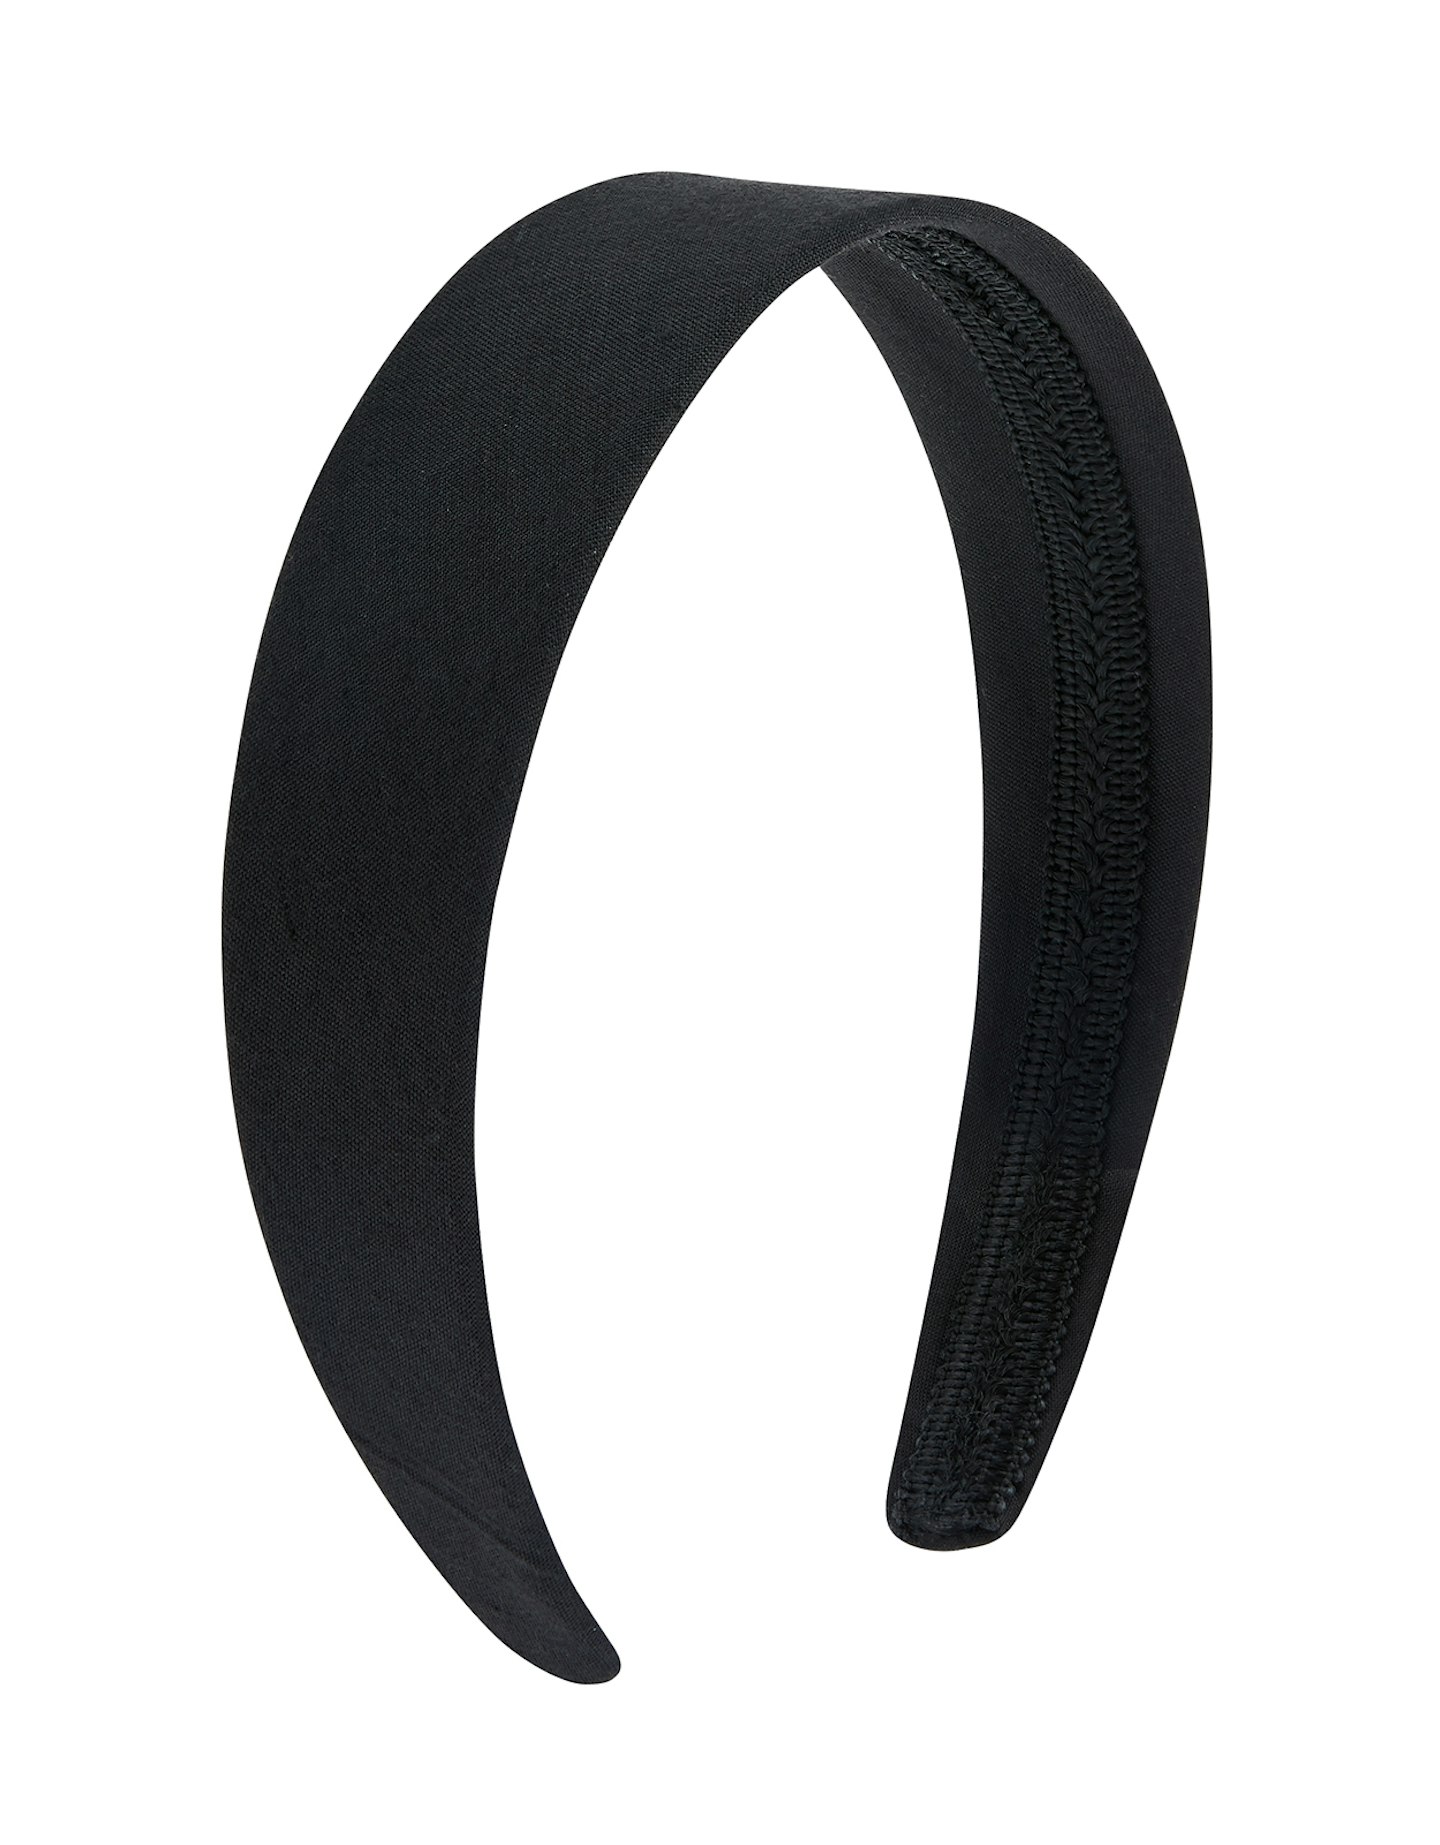 Accessorize, Large Simple Alice Hair Band, £3.50